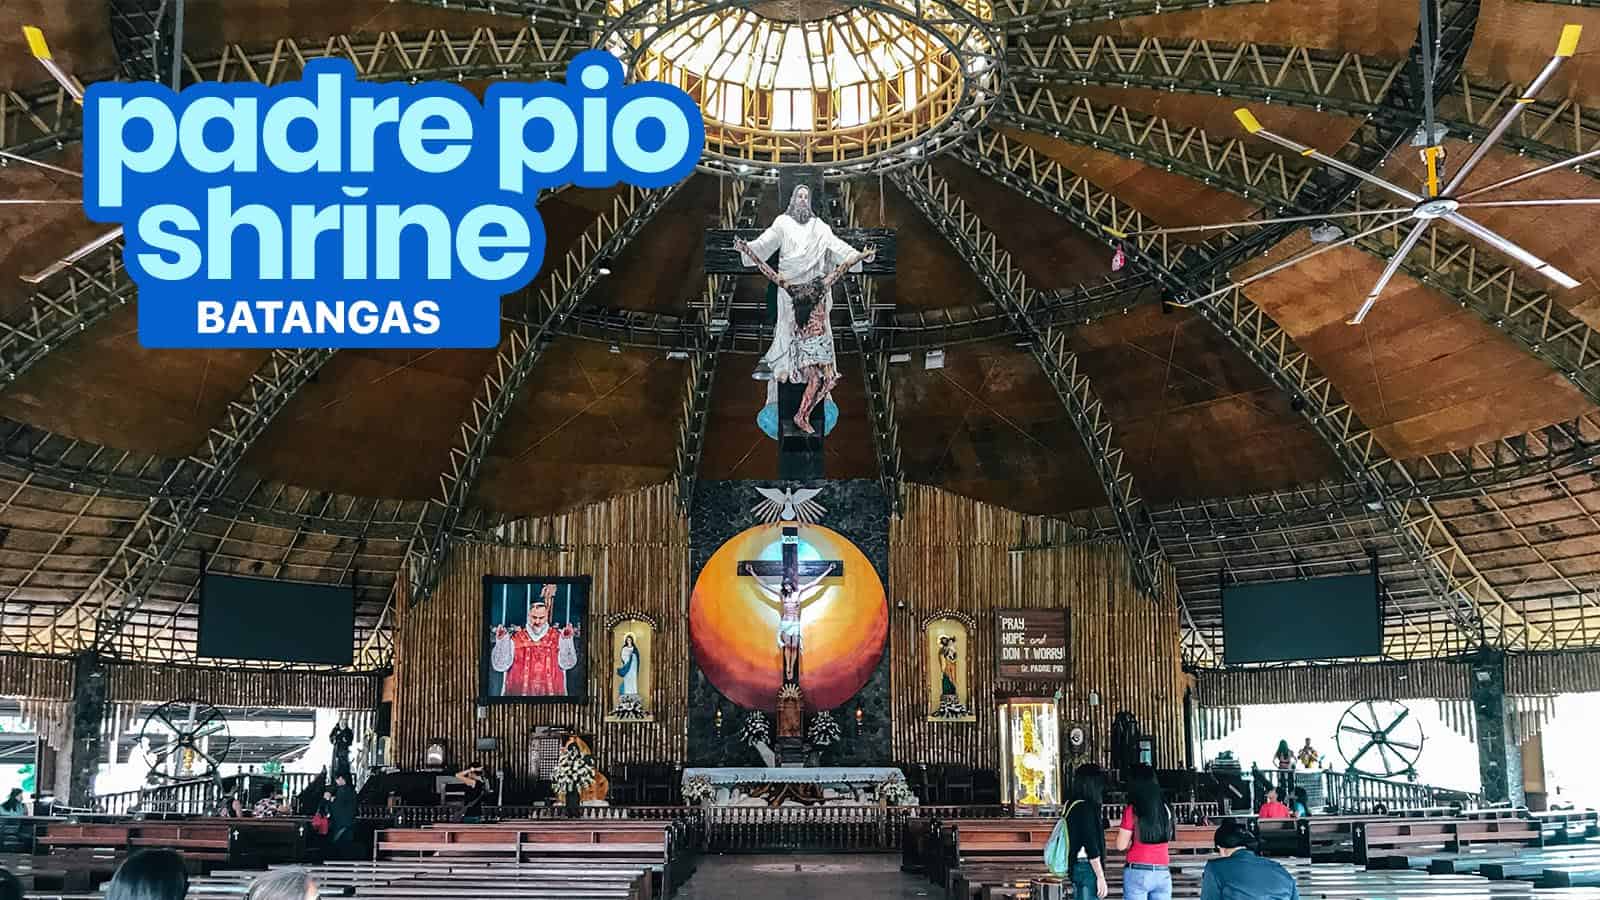 PADRE PIO SHRINE, BATANGAS: Travel Guide & How to Get There